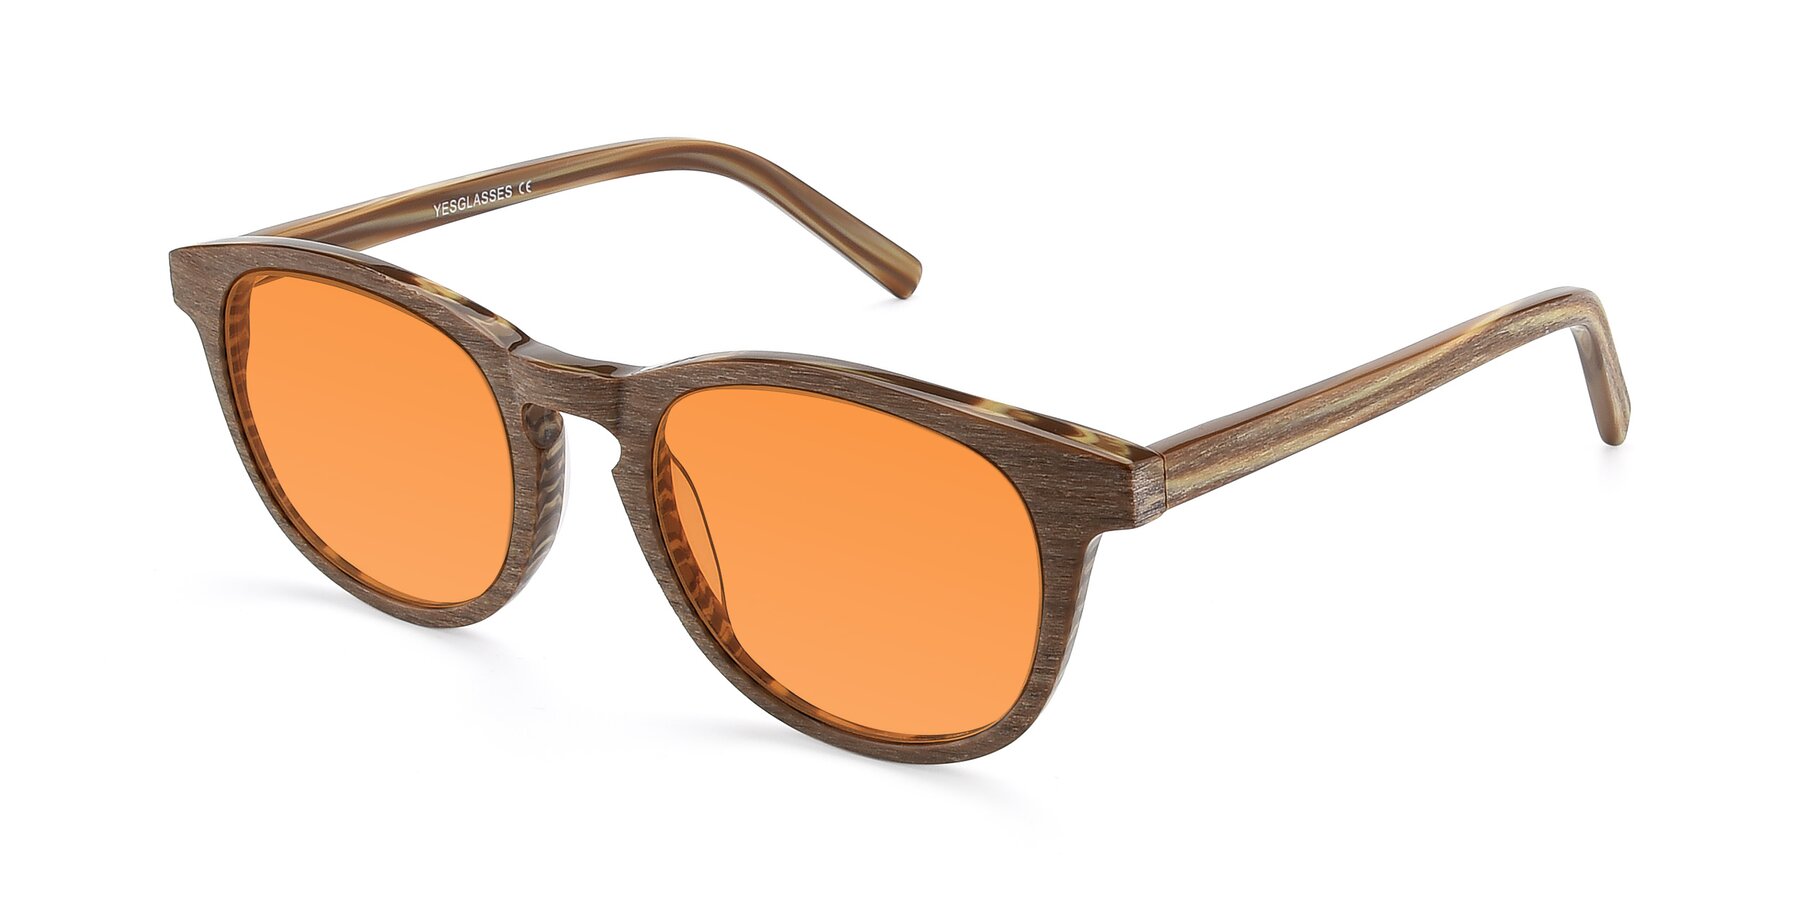 Angle of SR6044 in Brown-Wooden with Orange Tinted Lenses